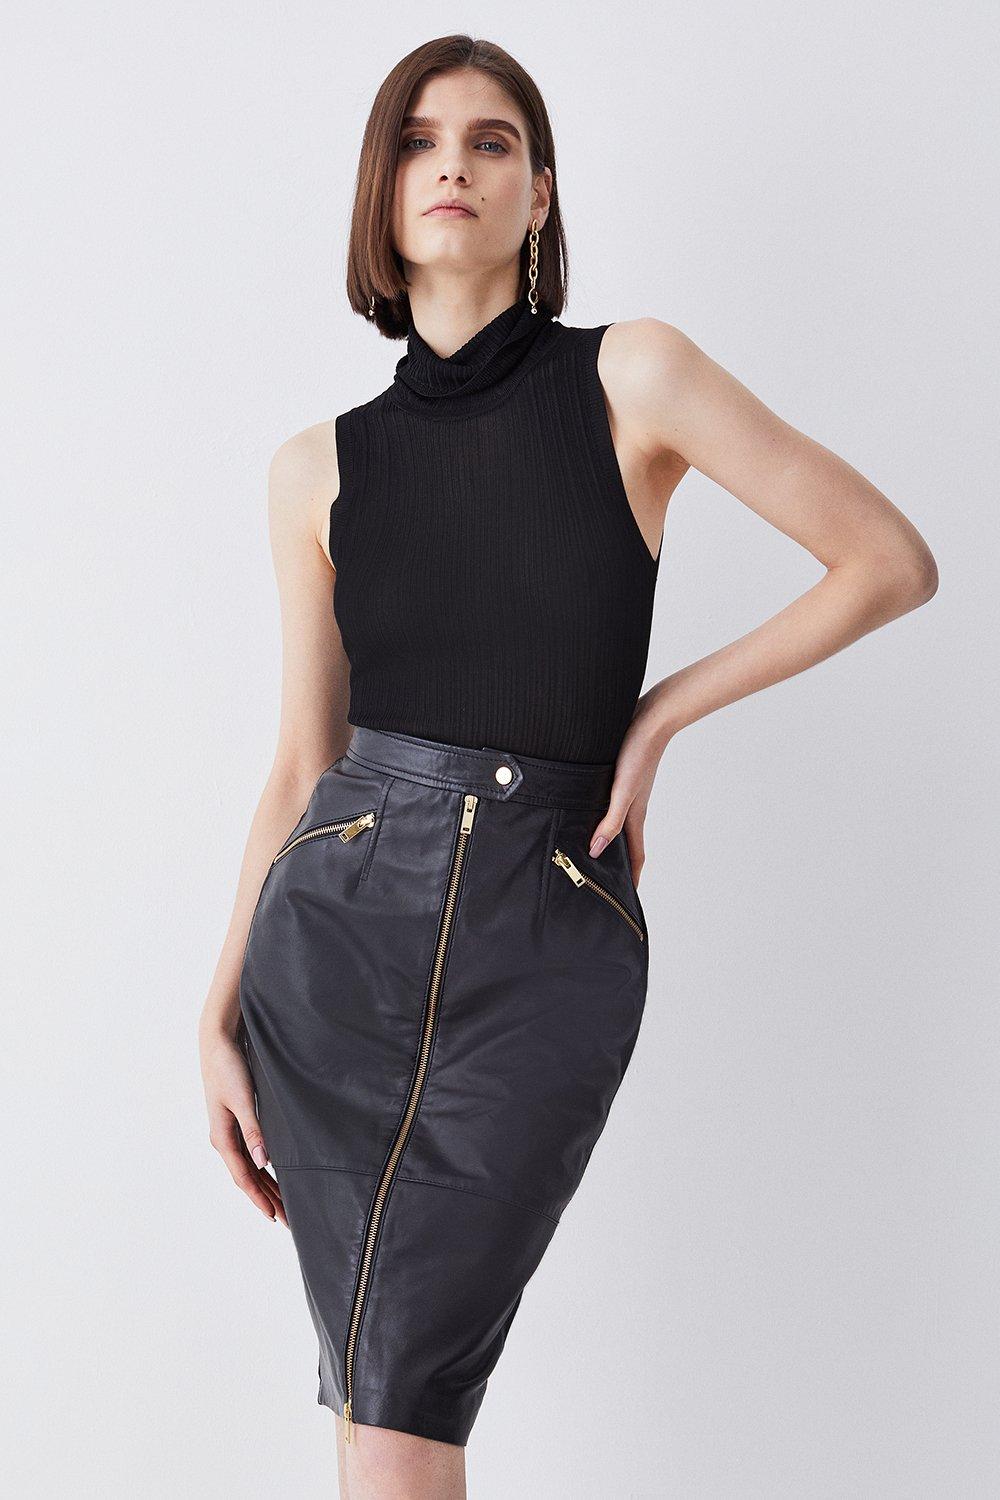 Women's Leather Clothing | Leather Outfits | Karen Millen